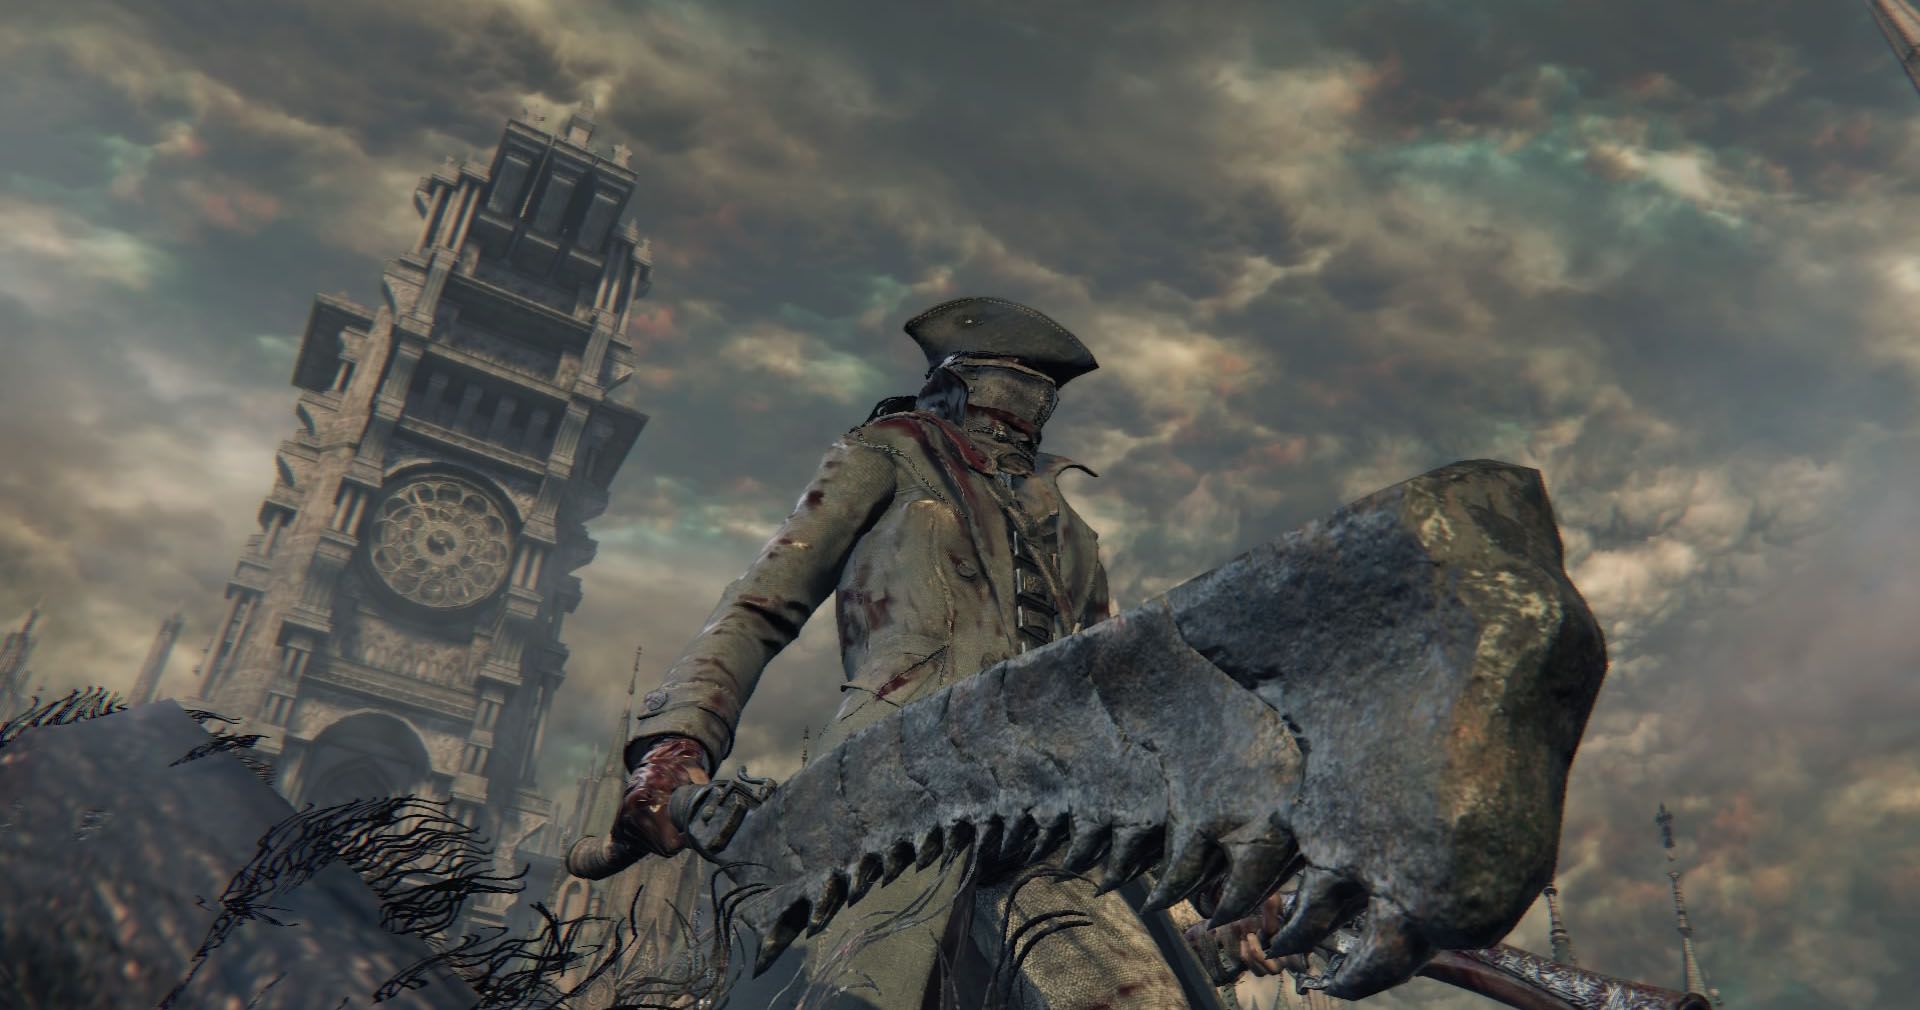 Image from the Bloodborne Wiki